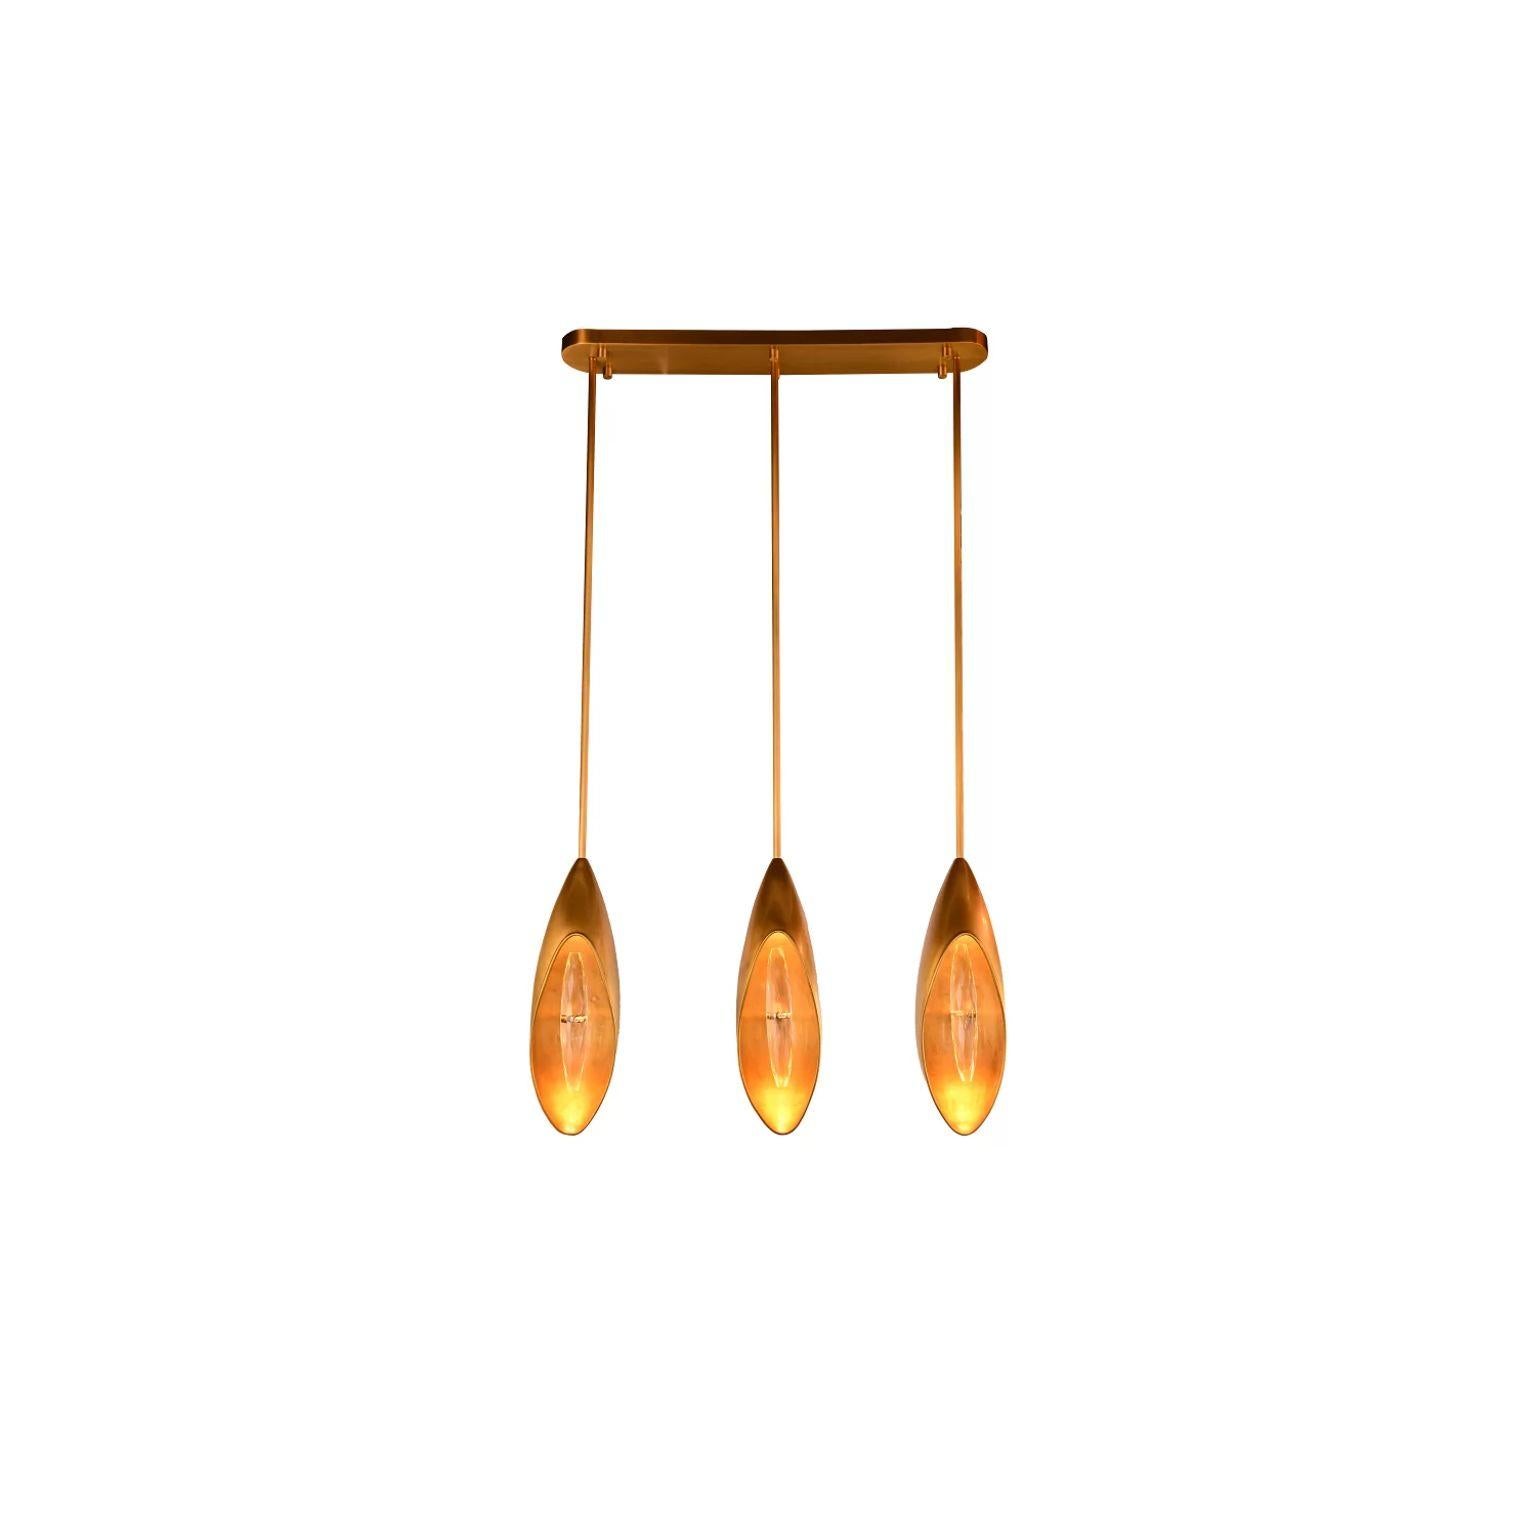 Lilly 3 Light Island Pendant Lamp by Dainte
Dimensions: Ø 70 x H 90 cm.
Materials: Crystal and brass. 

Lily flowers symbolize purity and devotion. The collection illustrates minimalistic and elegant silhouettes with complementary colors. The entire